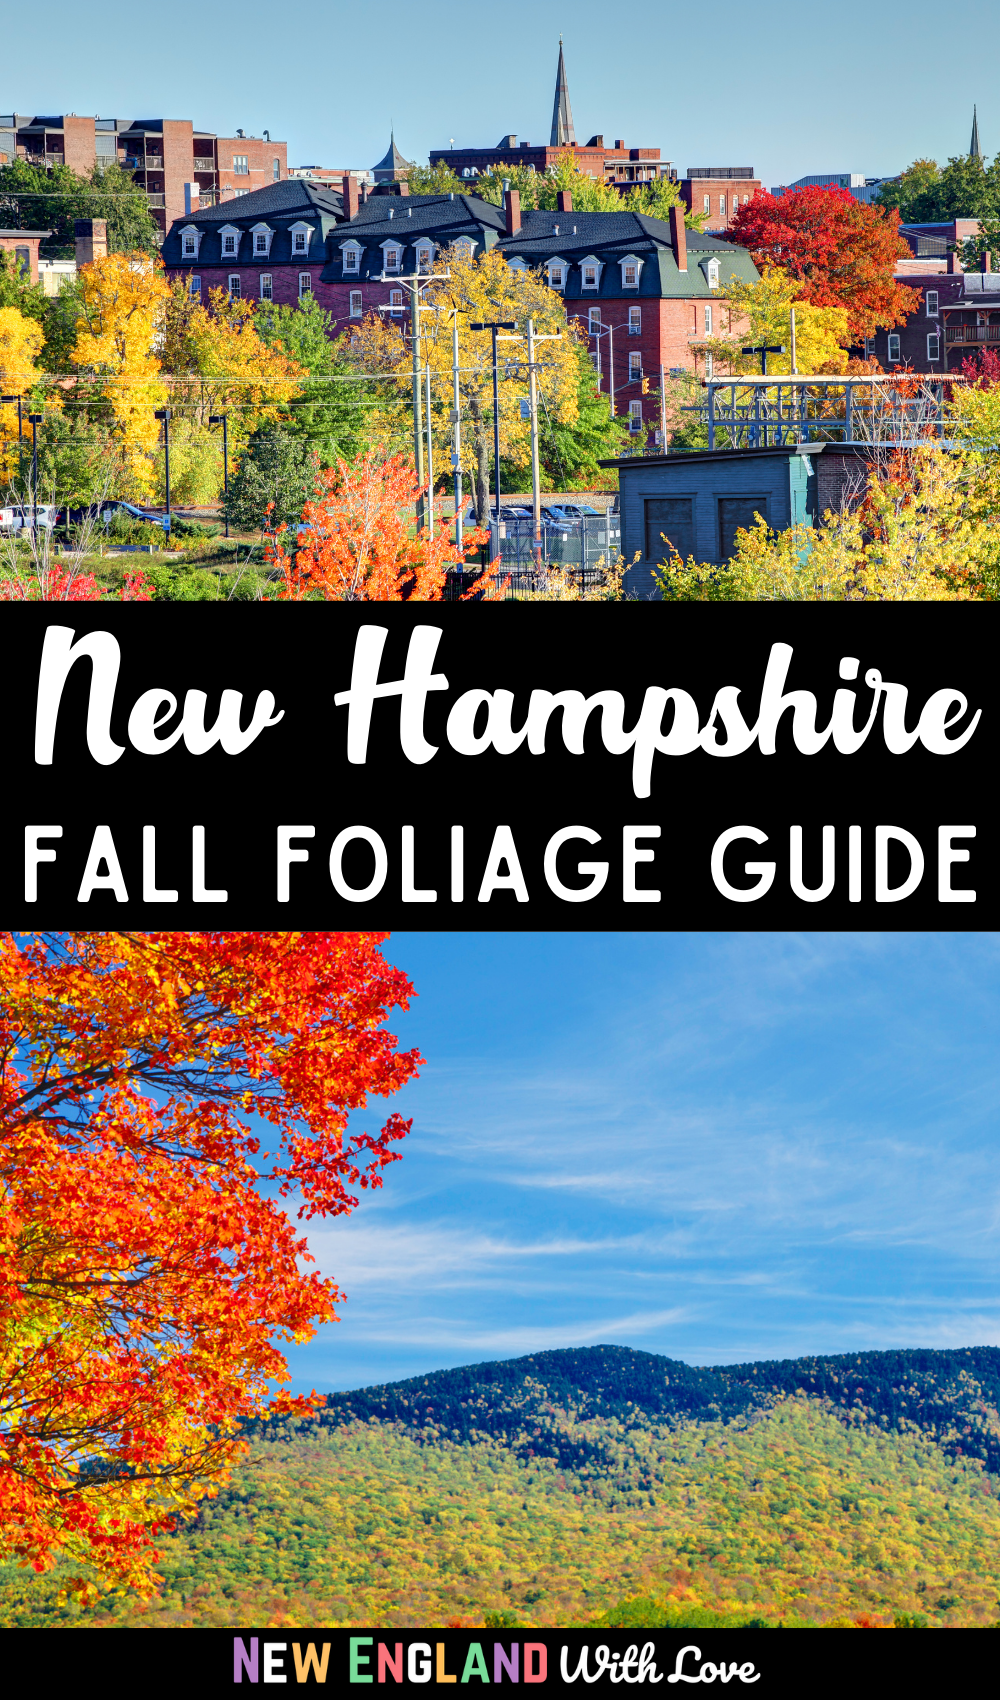 Pinterest graphic reading "New Hampshire Faqll Foliage Guide" with fall leaves above and below the words